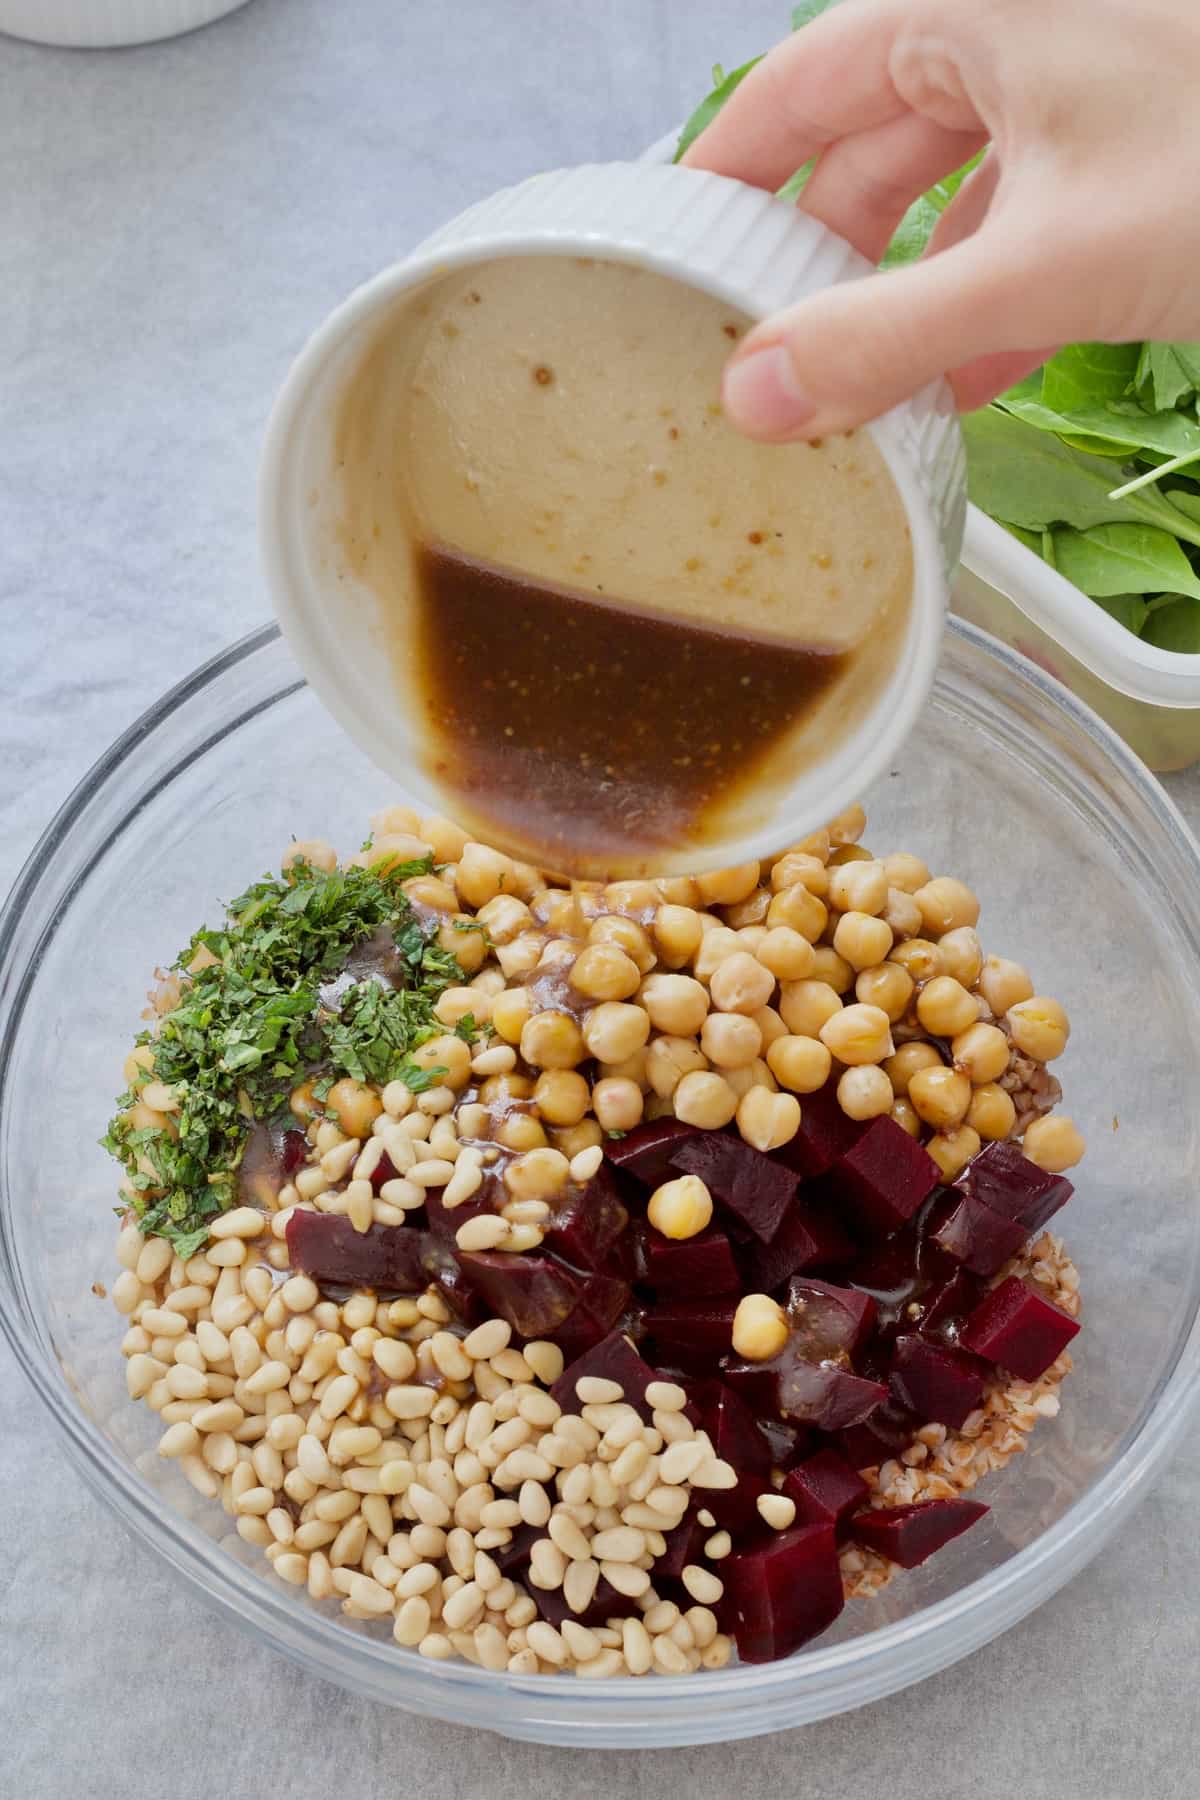 Dressing being poured onto salad ingredients in a bowl.